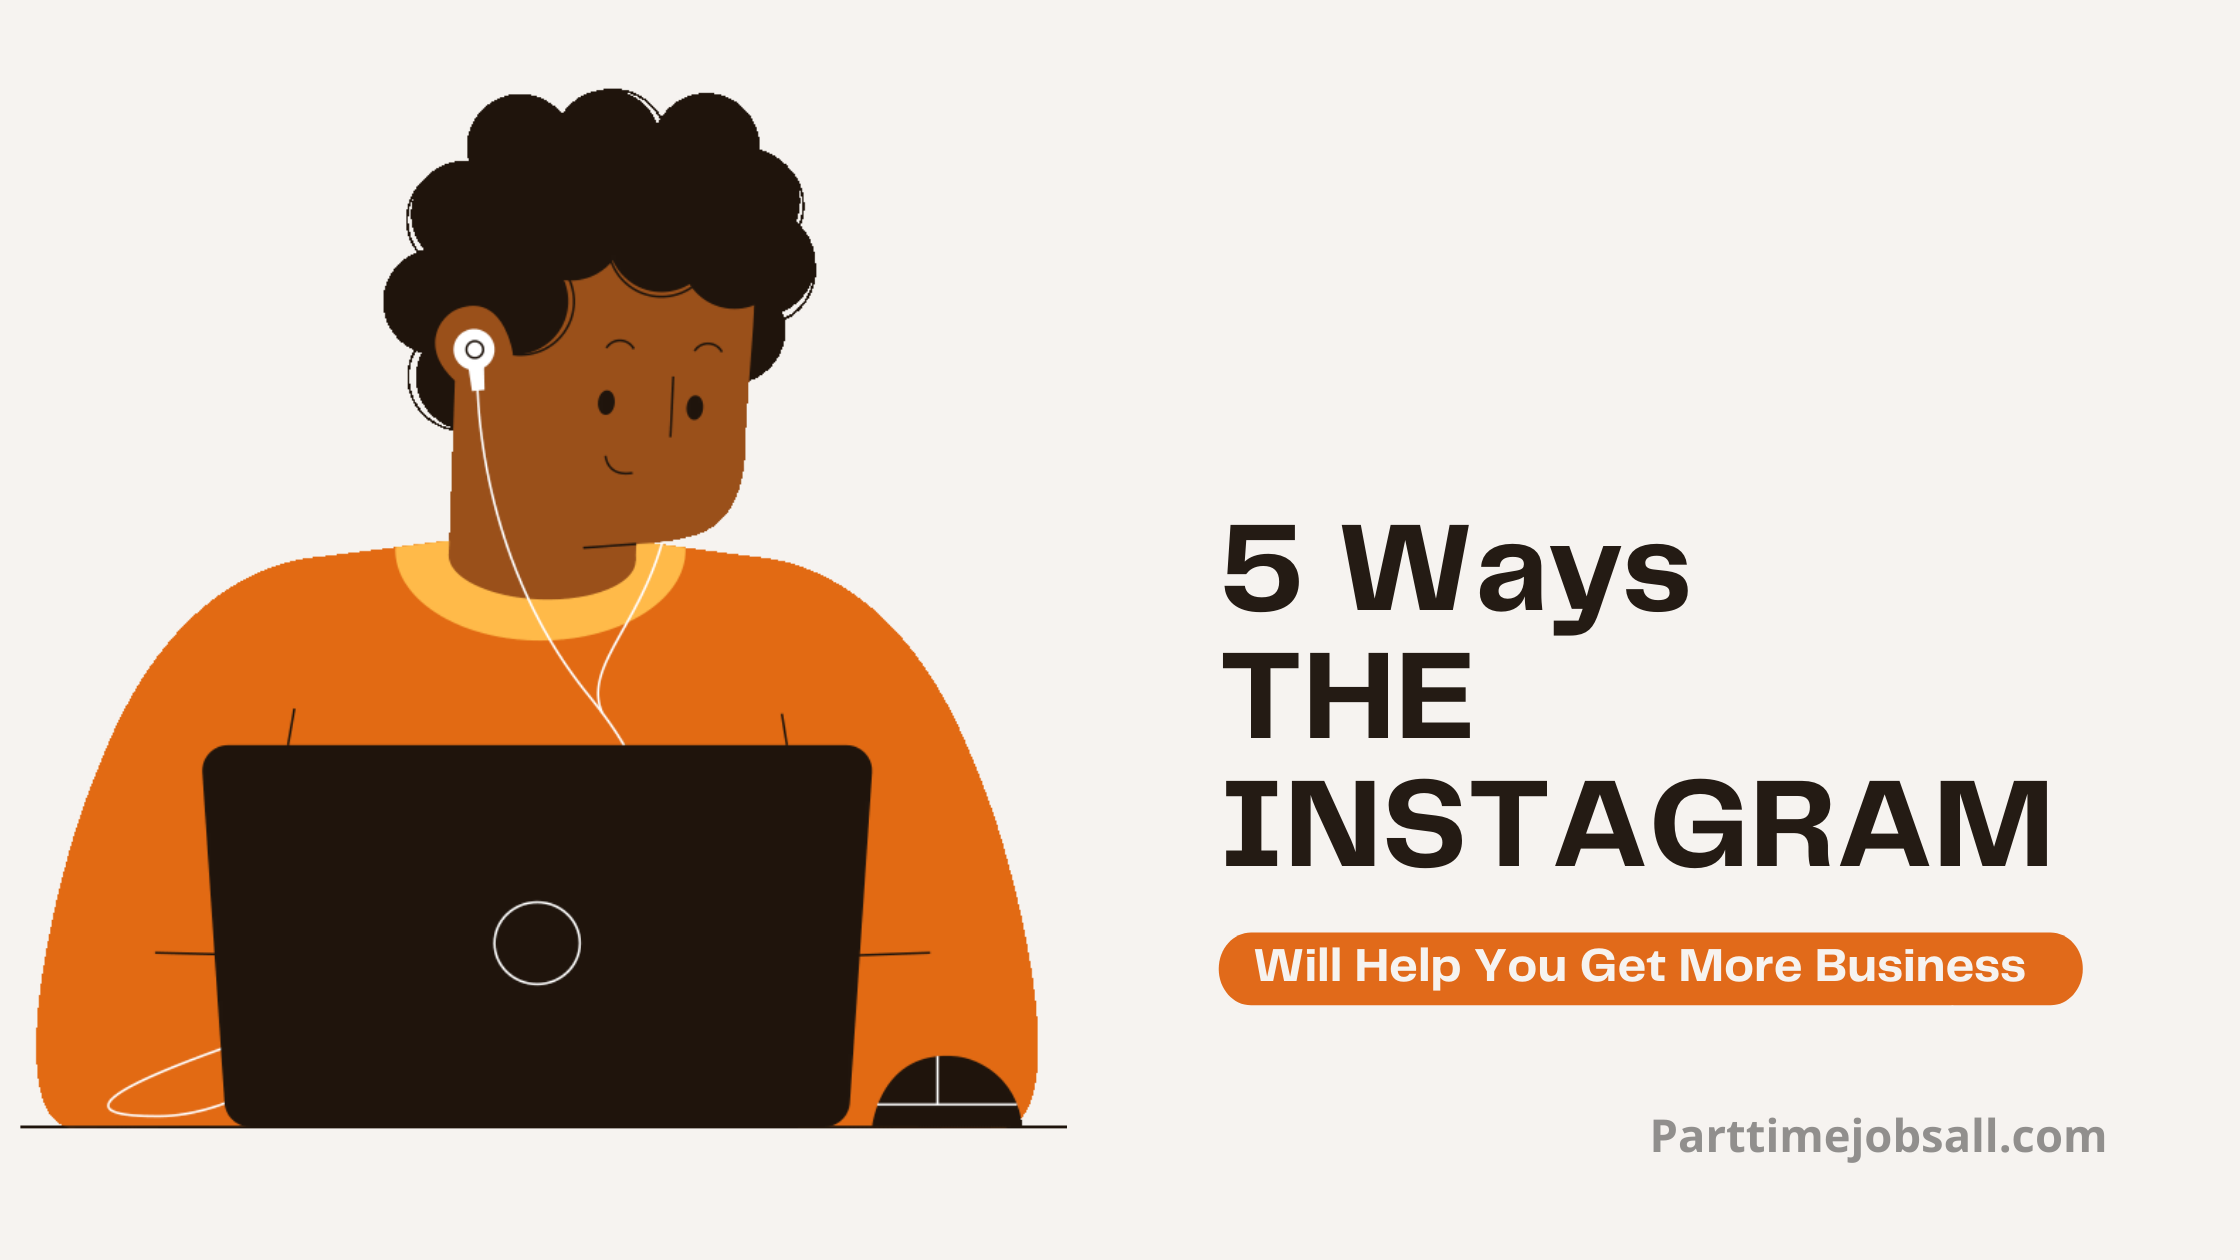 5 Ways The INSTAGRAM Will Help You Get More Business in 2021 - Read Now